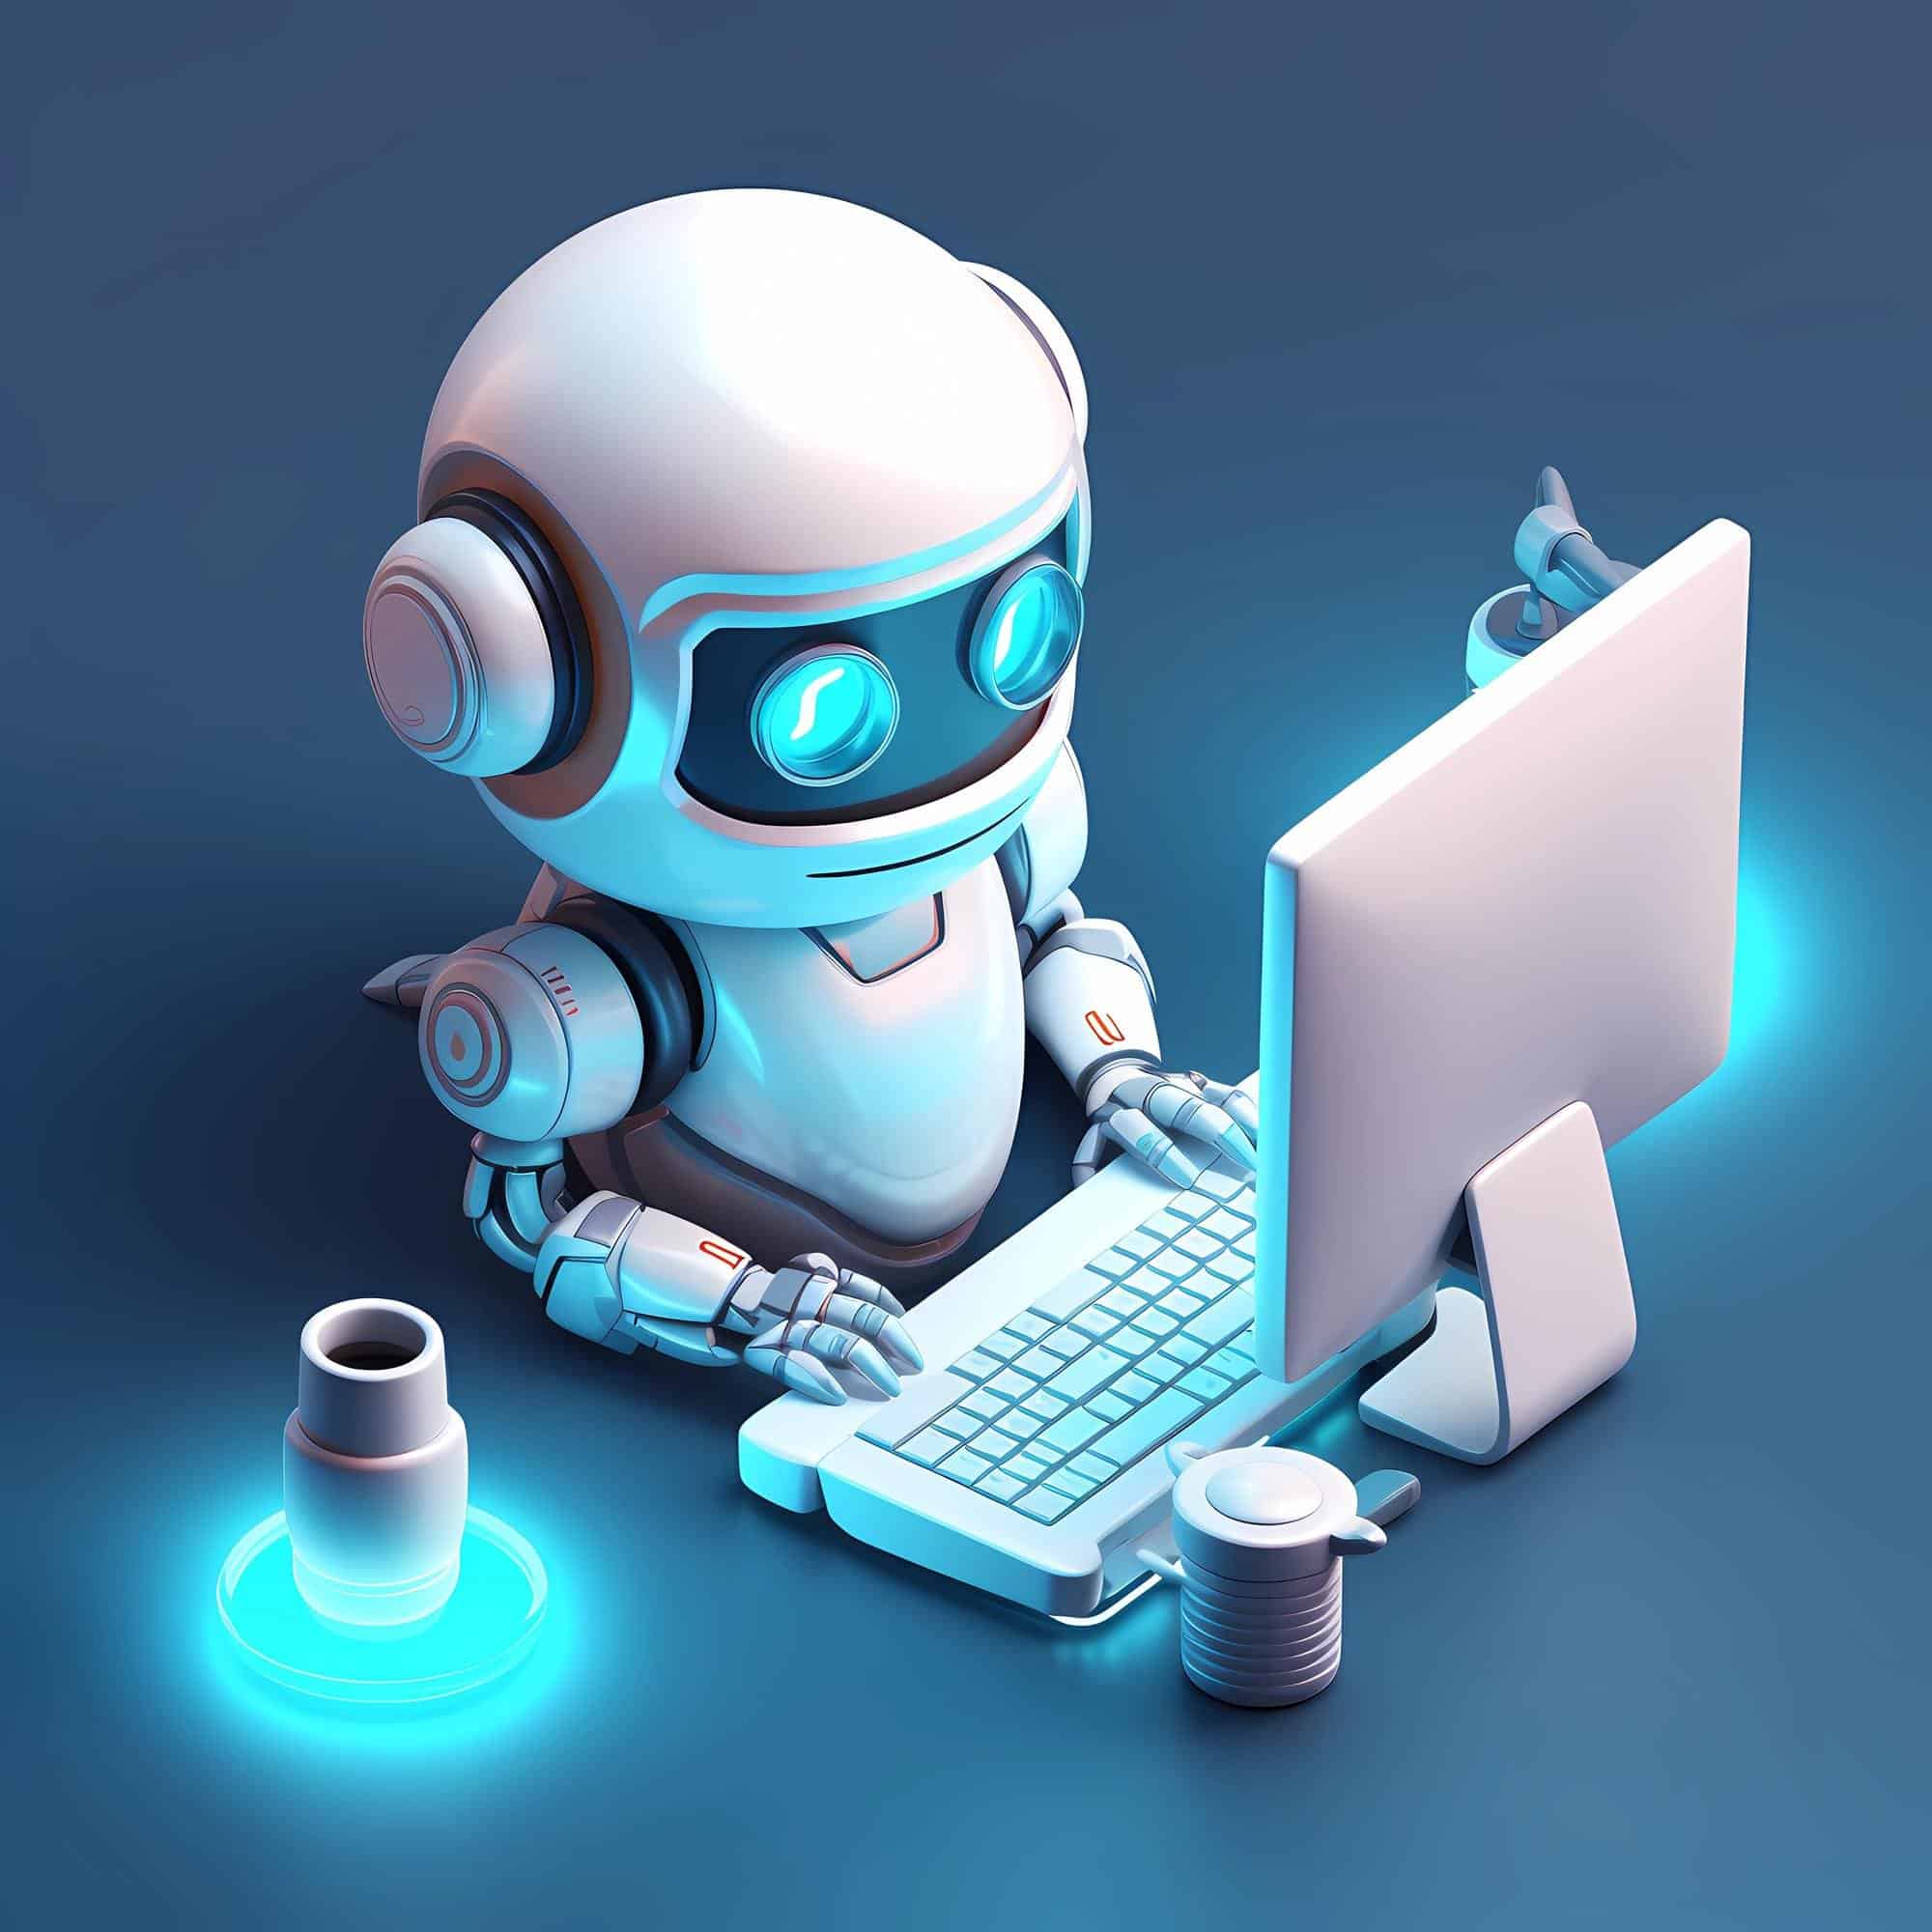 Chatbots and Virtual Assistants: The Role of AI